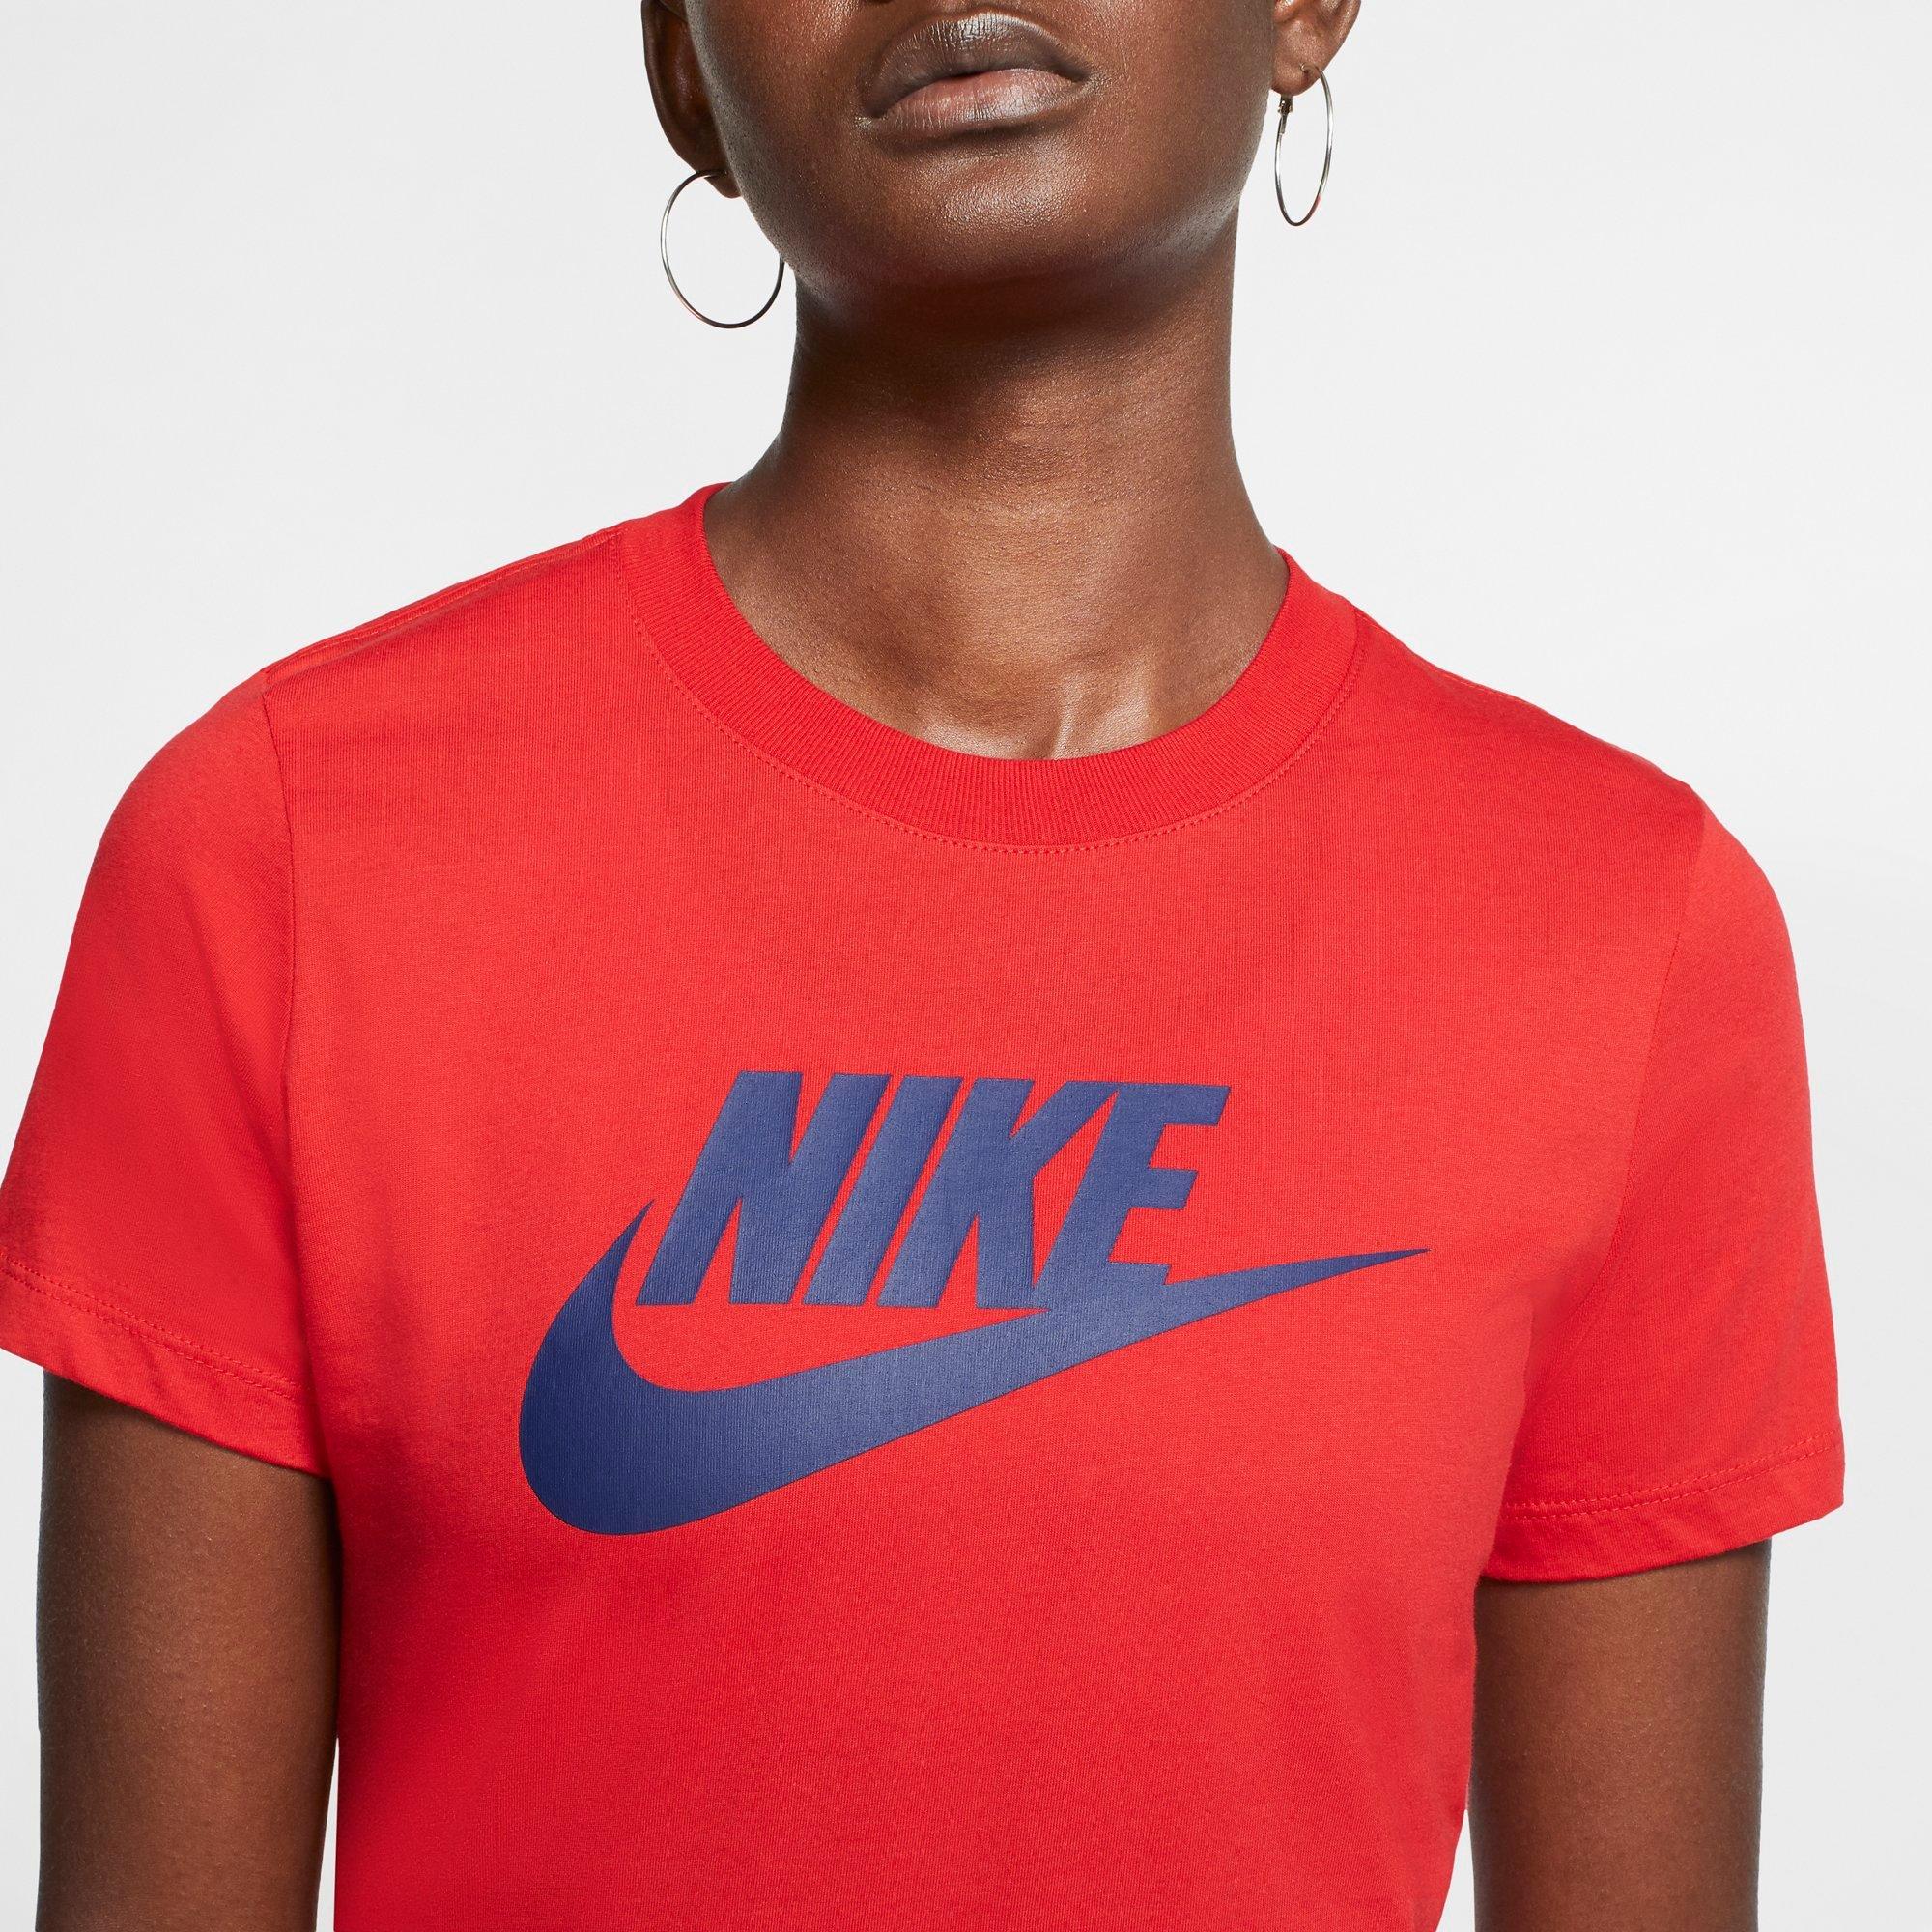 red nike tops womens